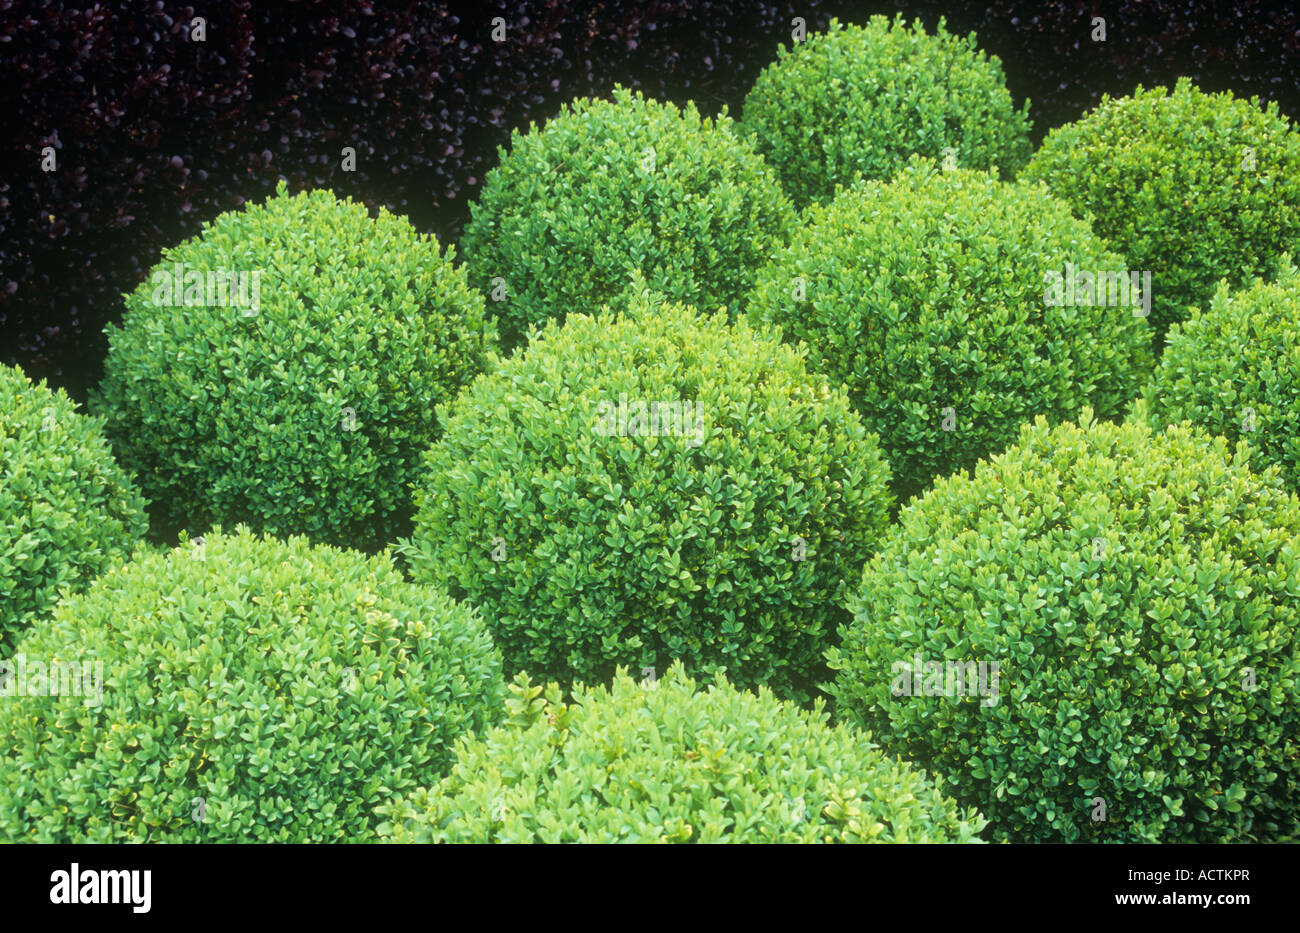 Light green Box or Buxus shrubs clipped into low spheres contrasting with deep purple of Barberry hedge or Berberis thunbergii Stock Photo